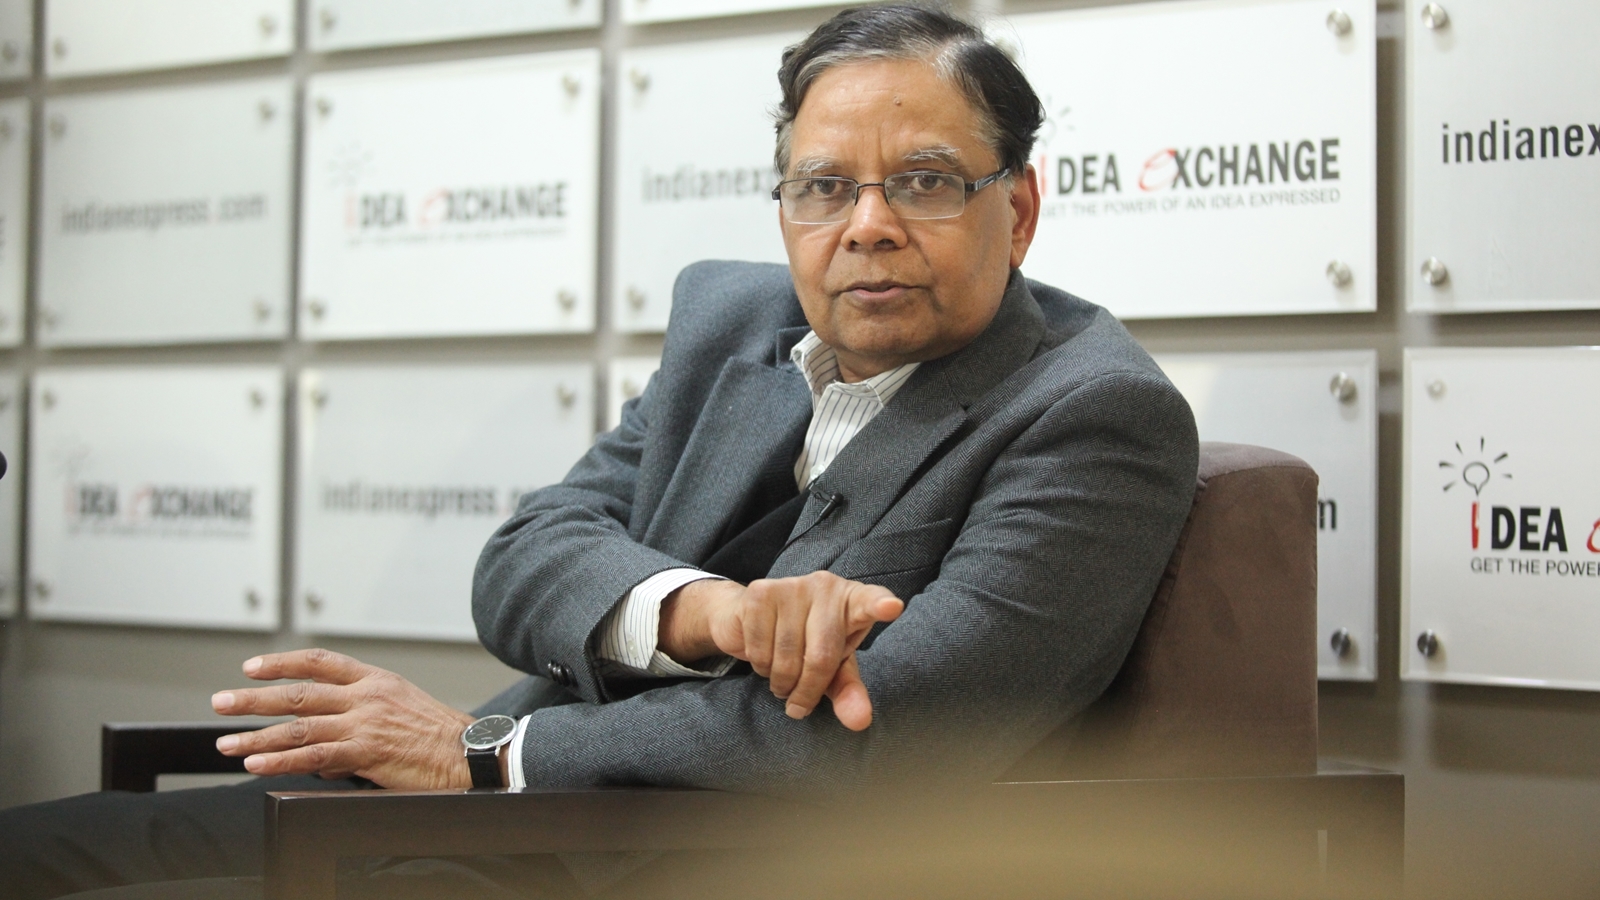 android, it’s time we realised our full potential to 10 per cent growth: arvind panagariya